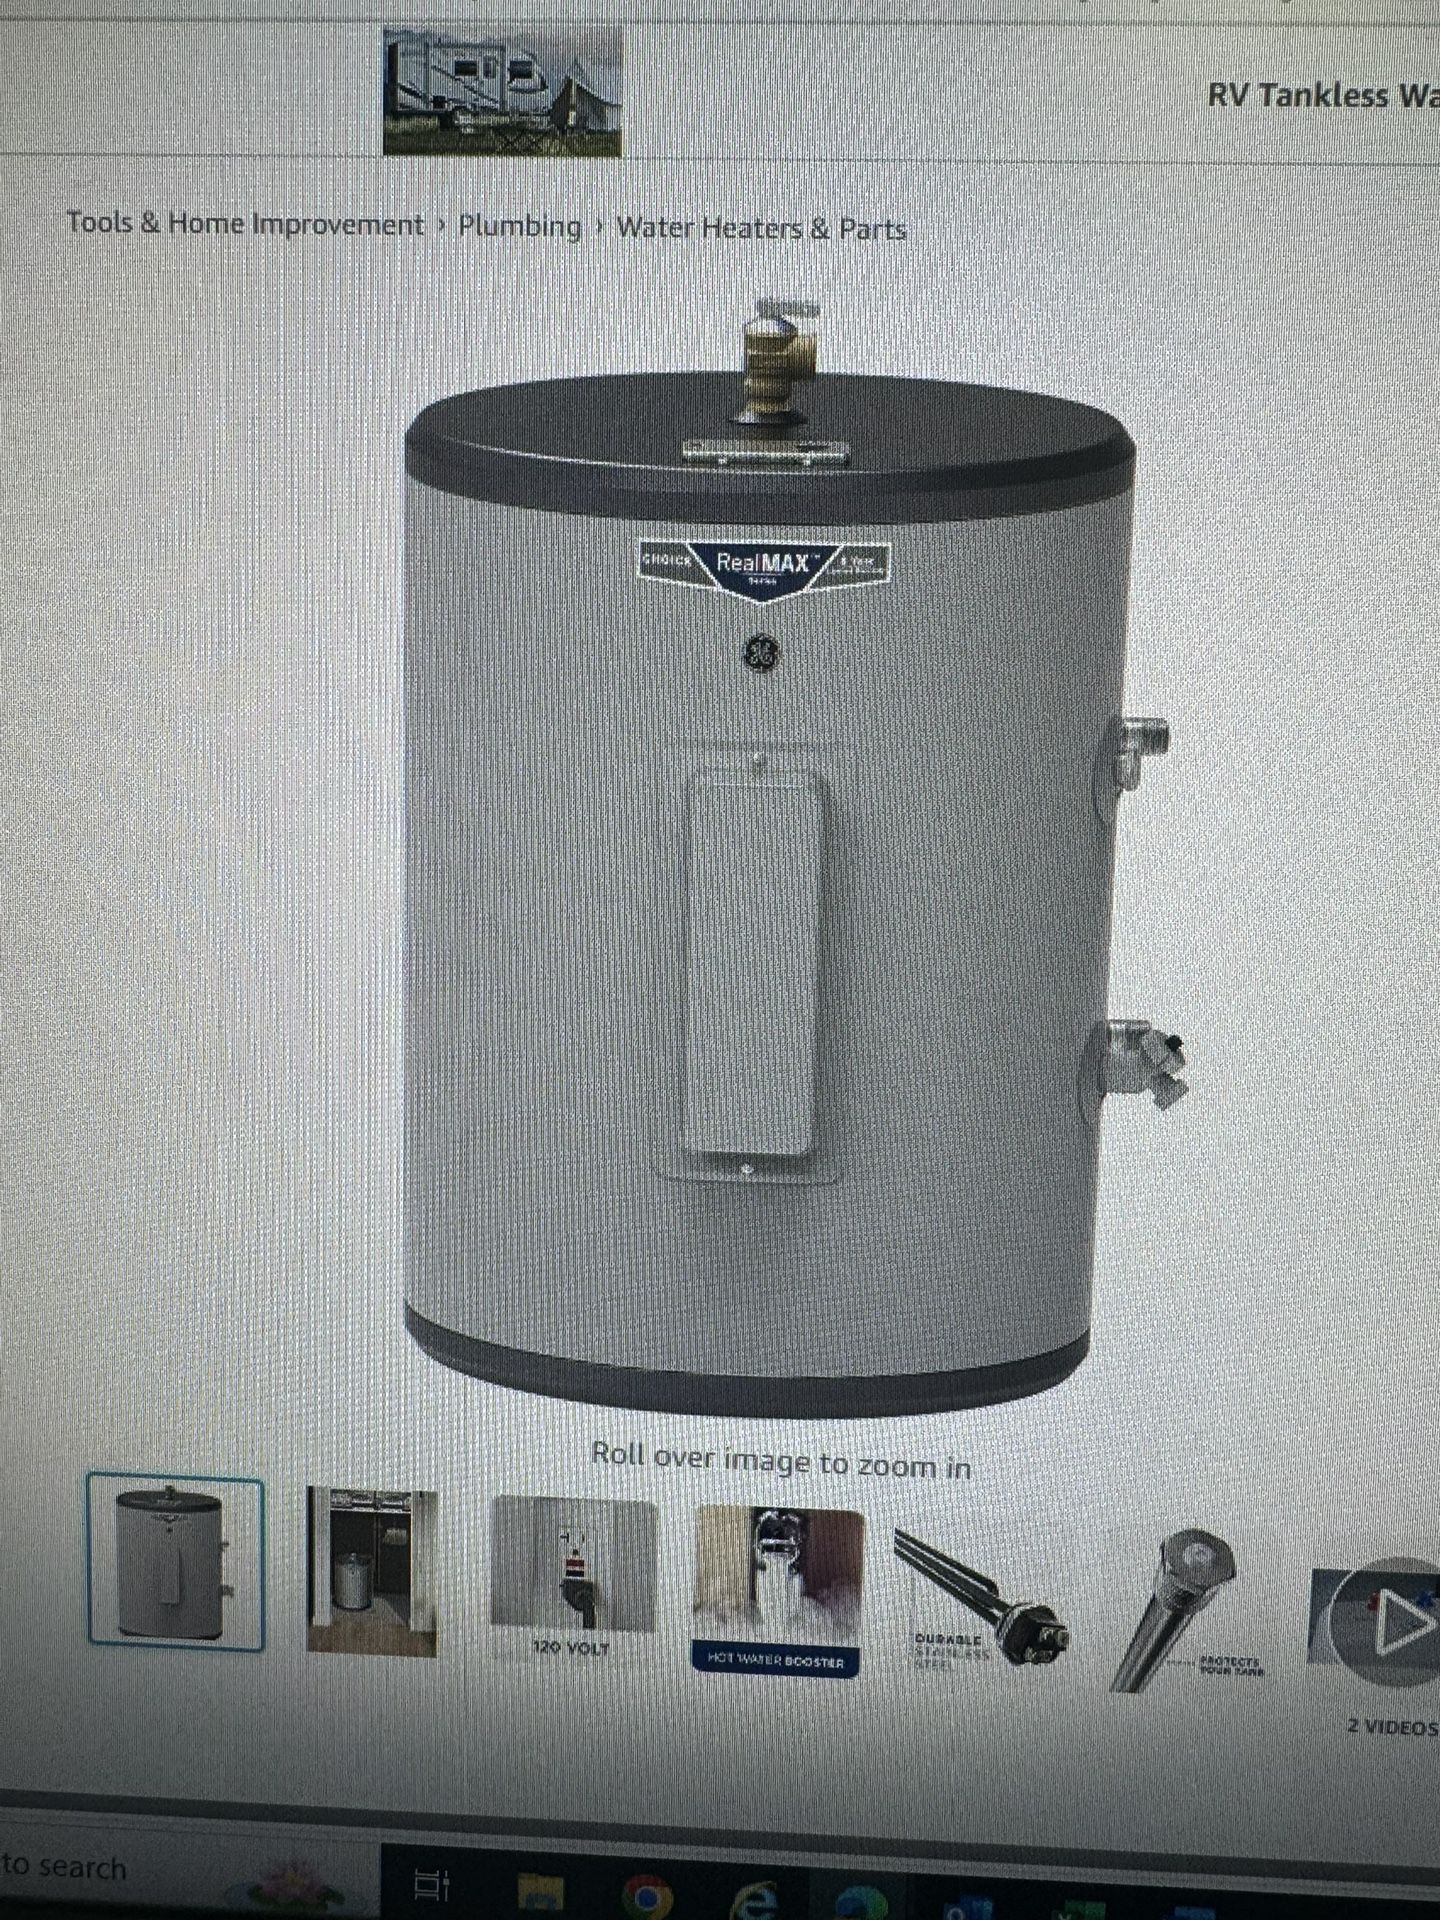 GE Water Heater 18 Gallon For Indoor Install